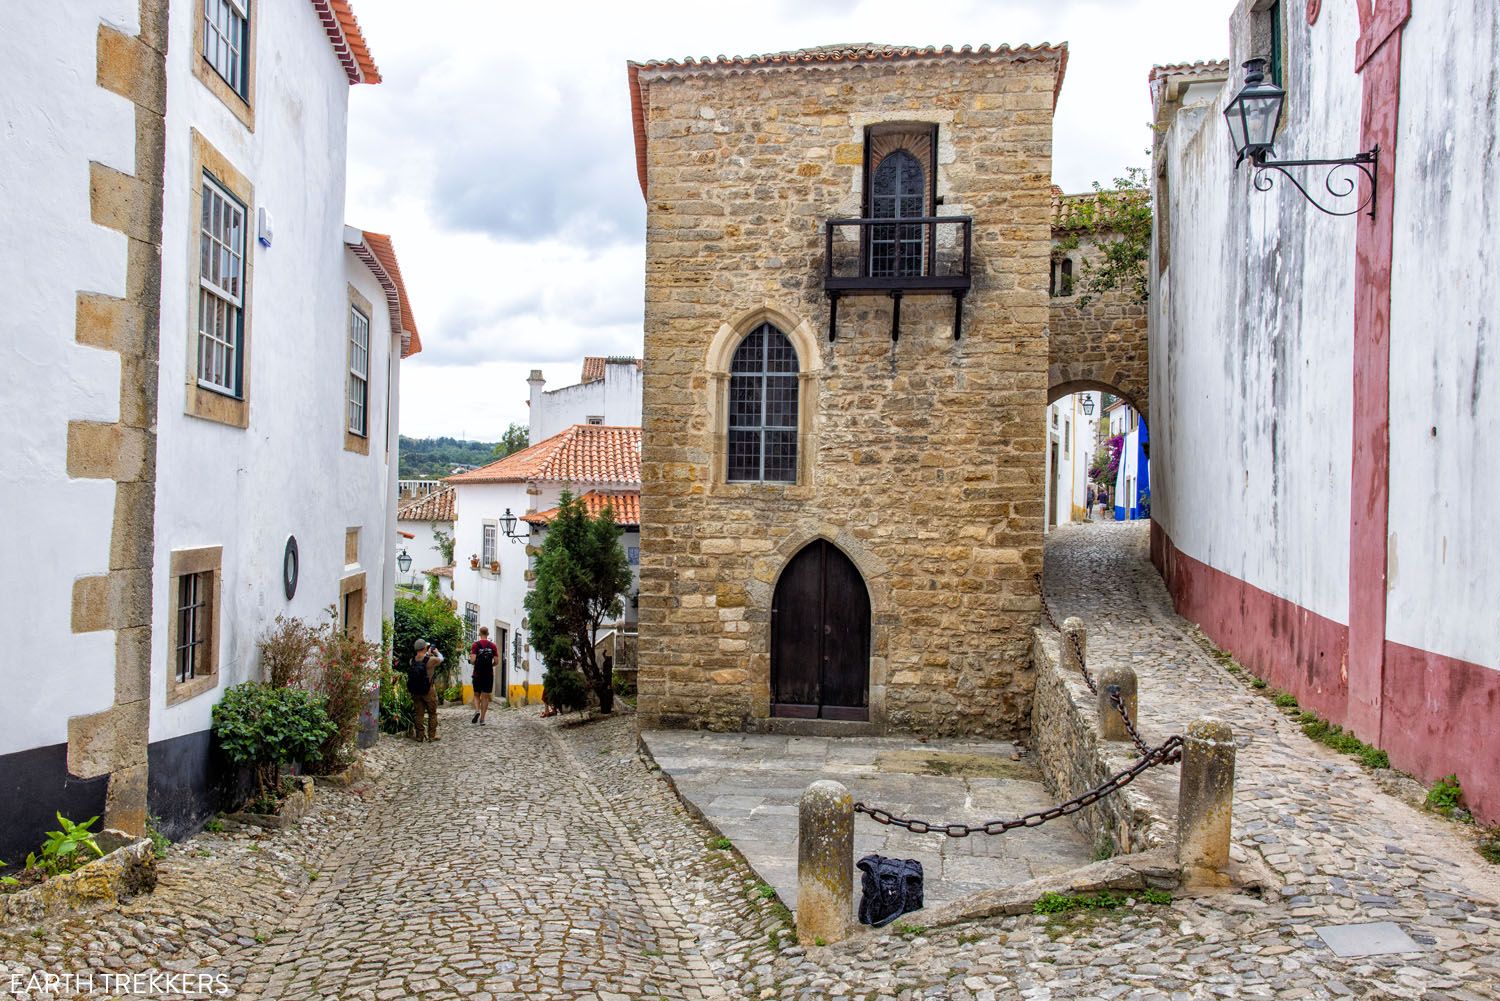 Things to do in Obidos